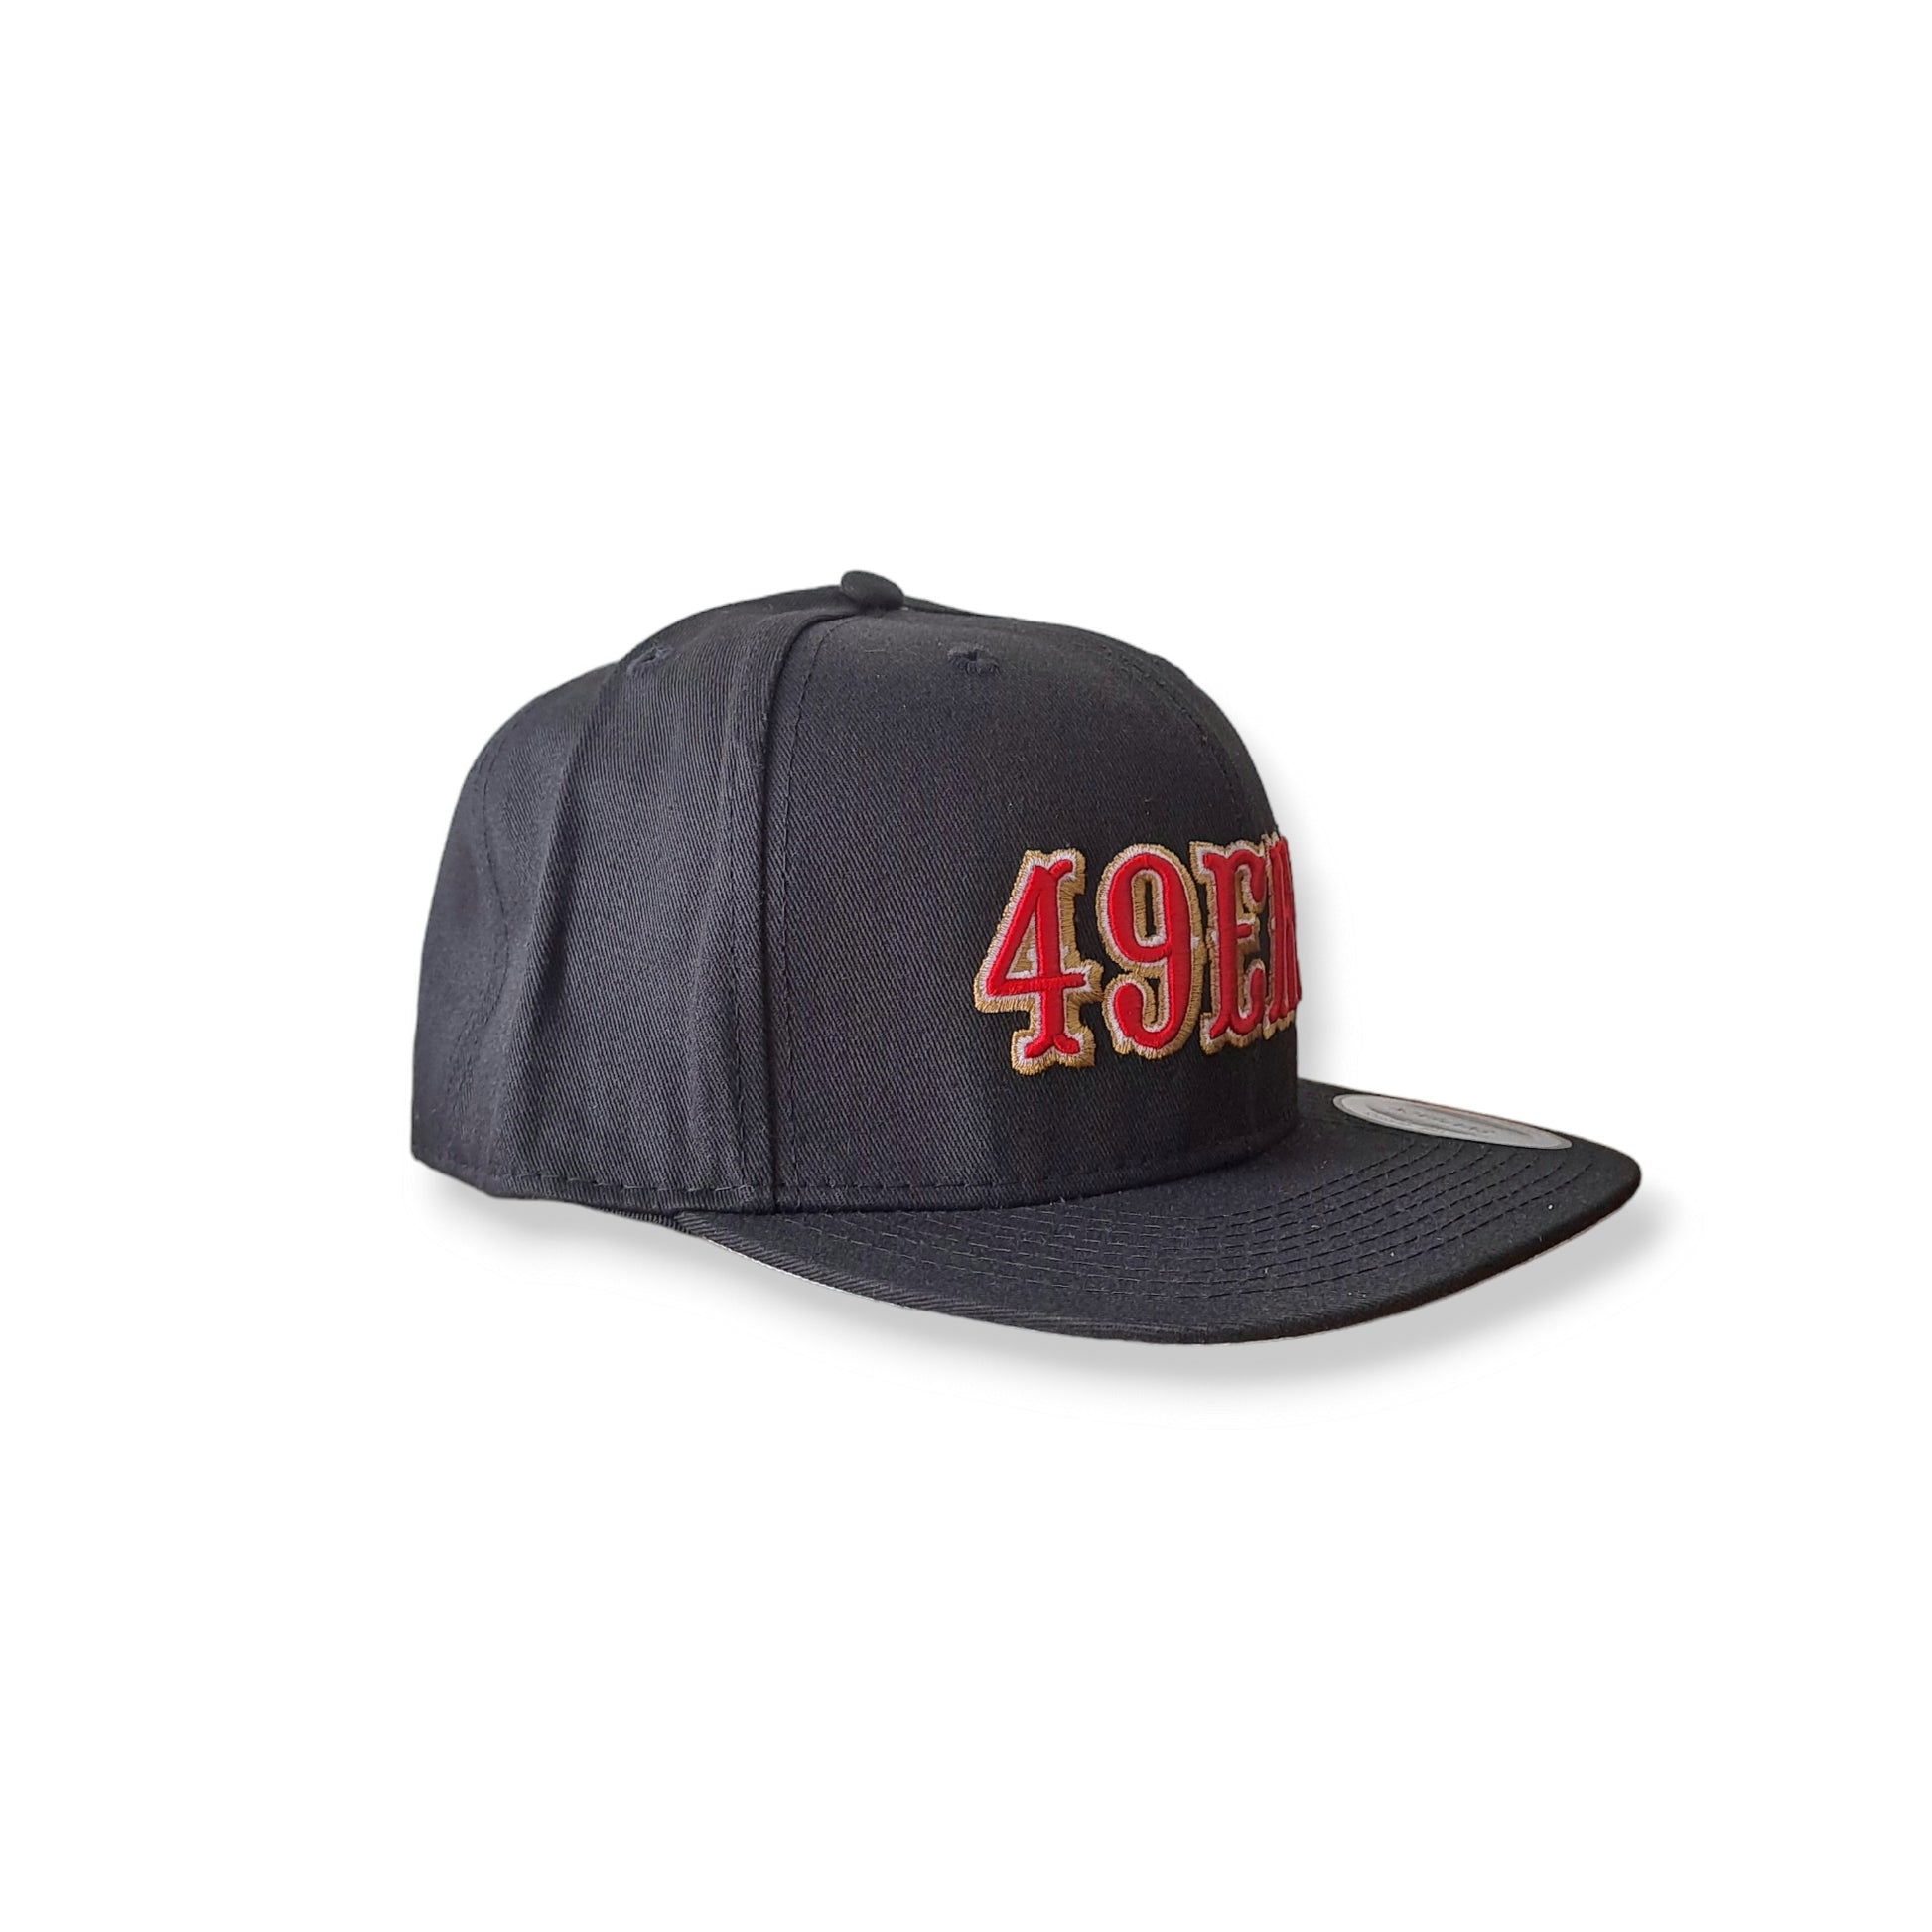 San Francisco 49ers NFL black and red cap